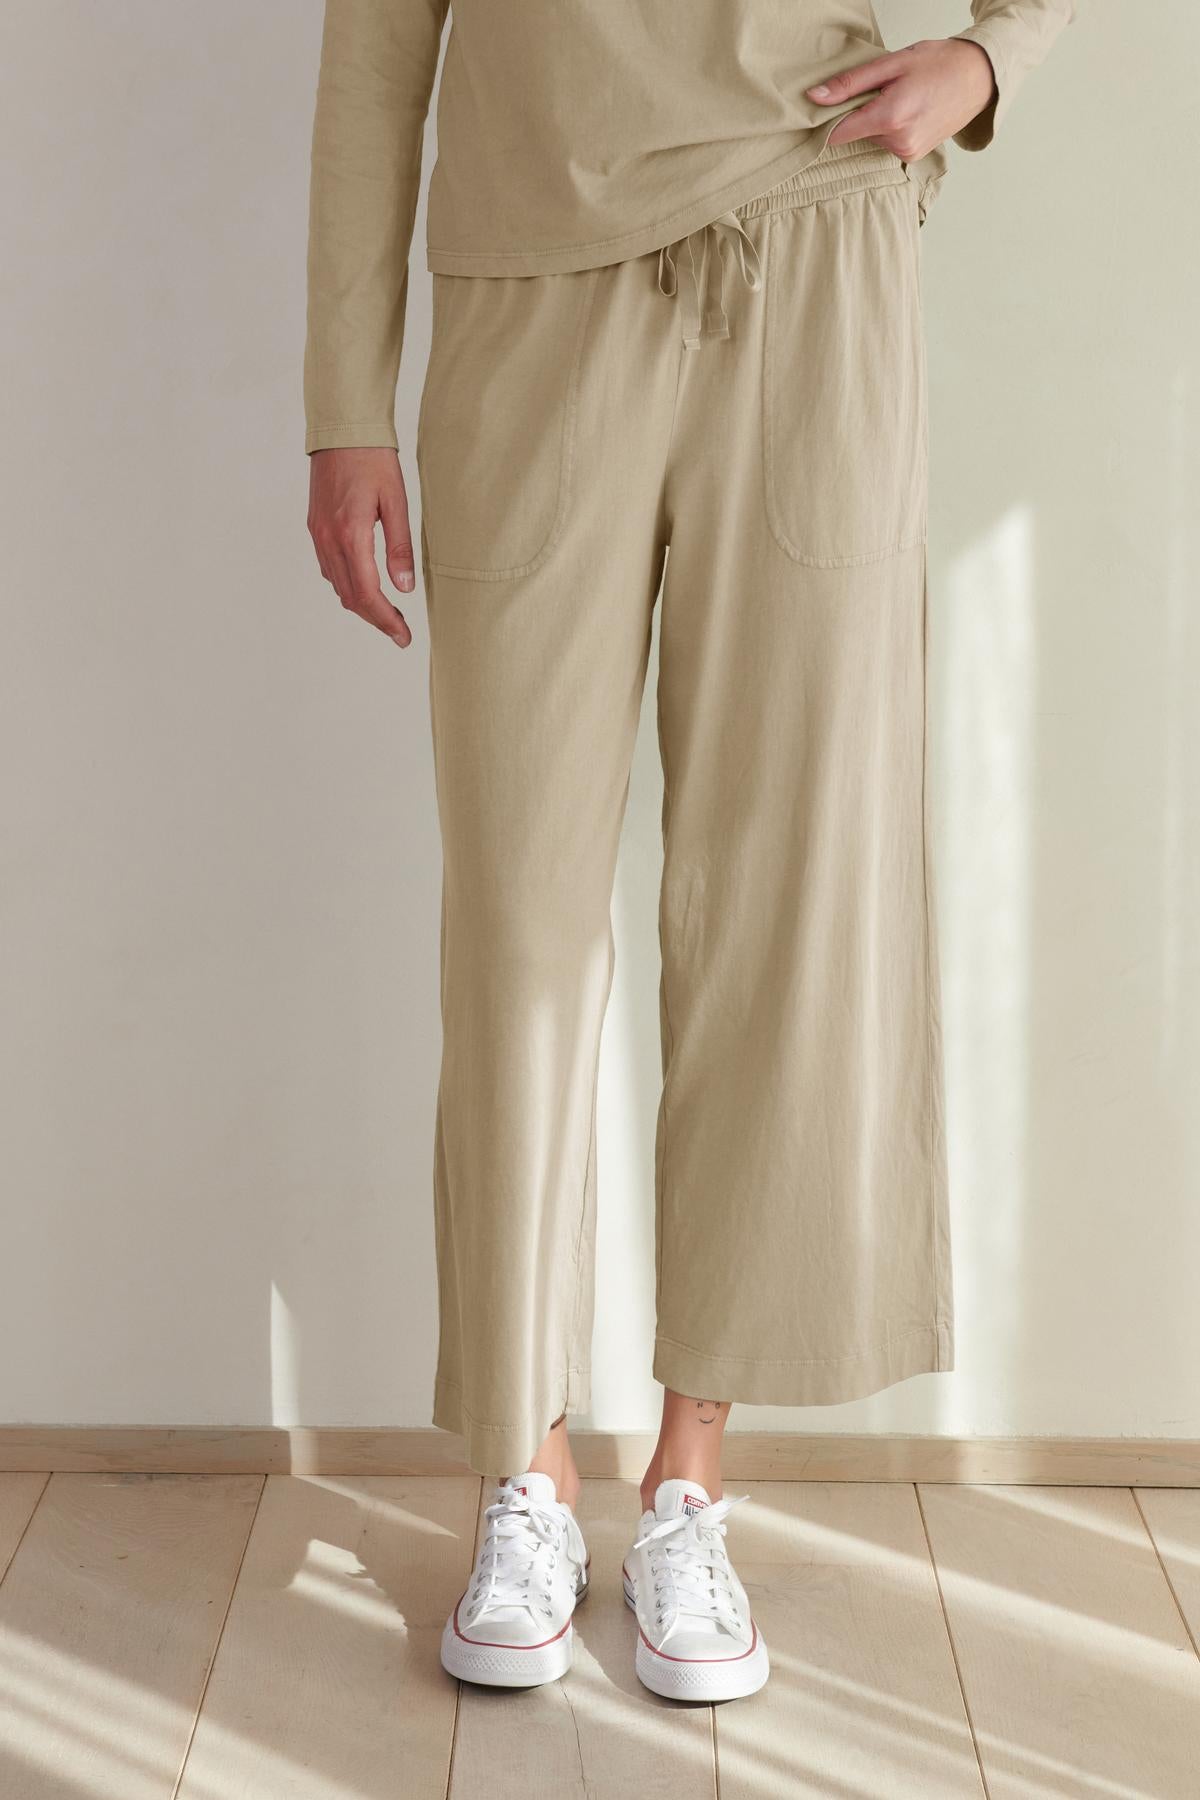 A person standing in a room wearing Velvet by Jenny Graham's PISMO PANT and white sneakers.-36463776465089